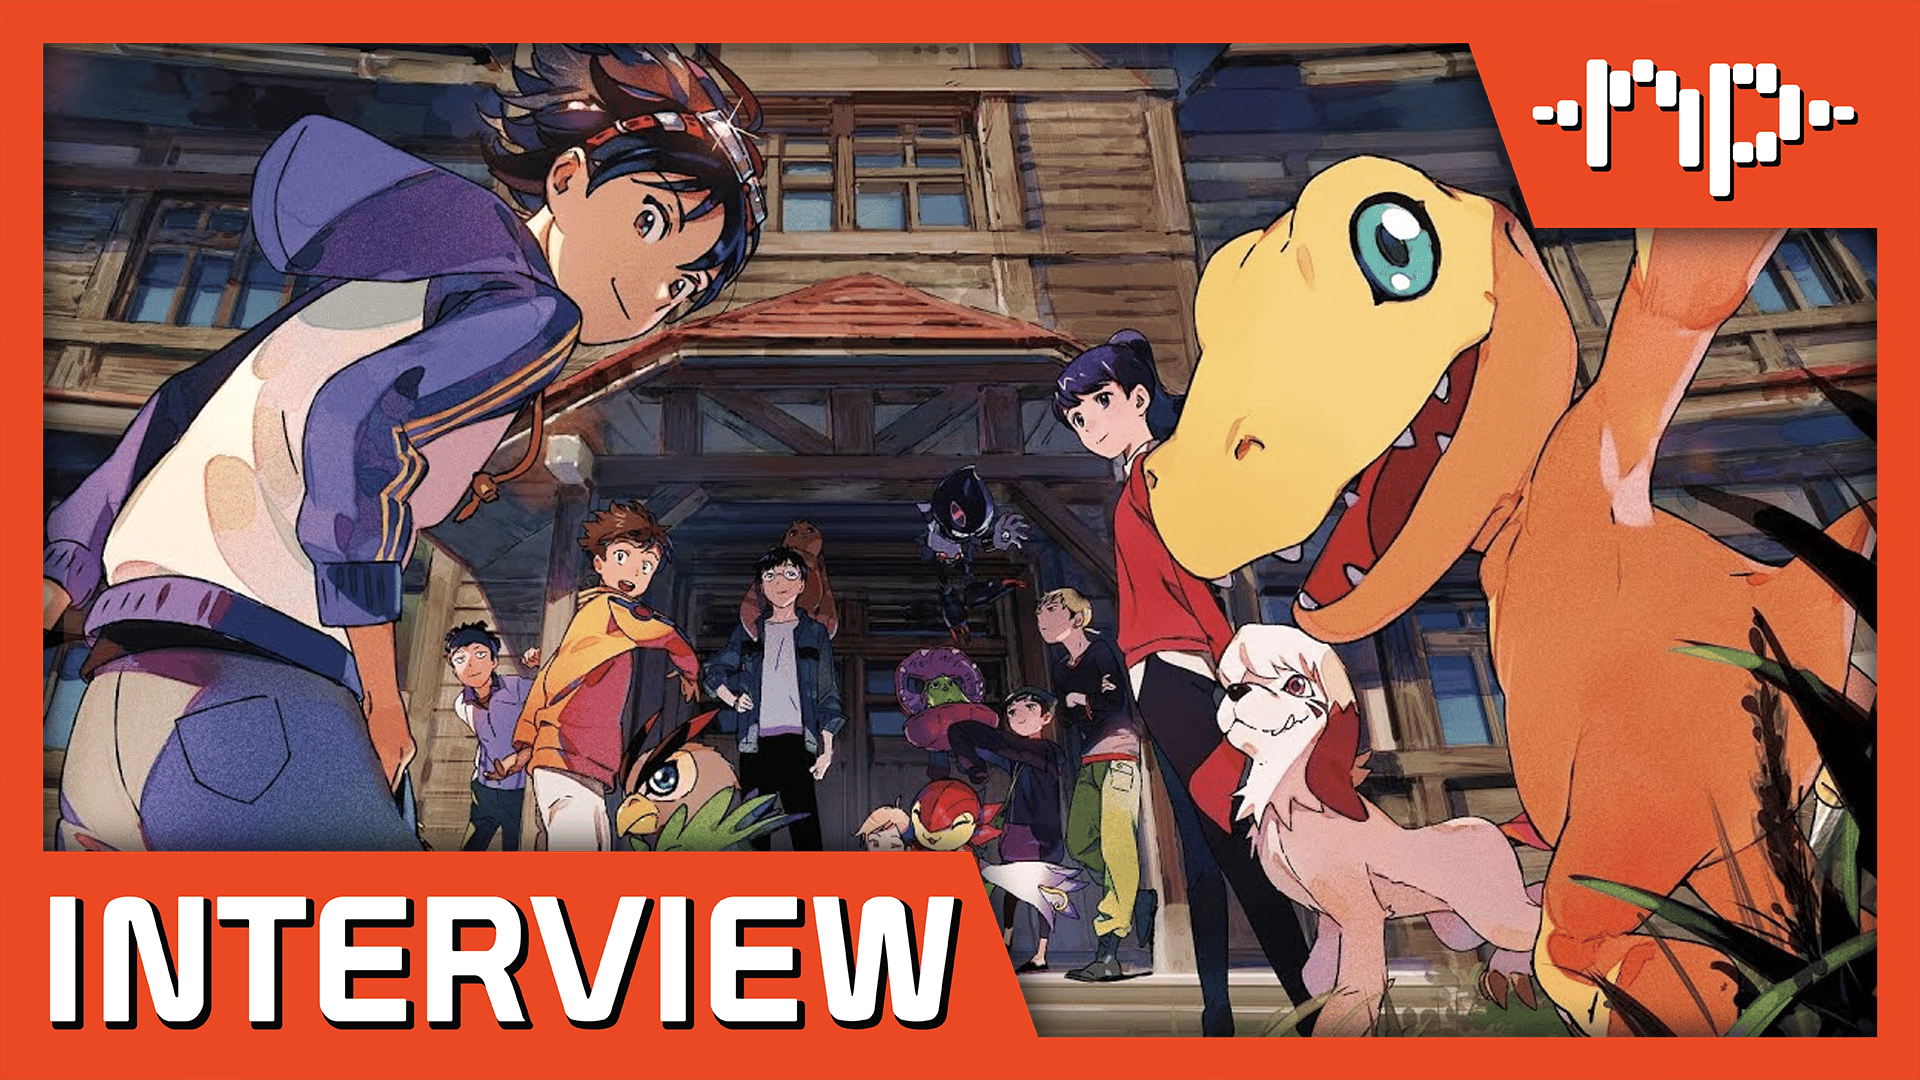 Digimon Survive Interview – Producer Reflects on Crafting This Unique and Dark Digimon Experience